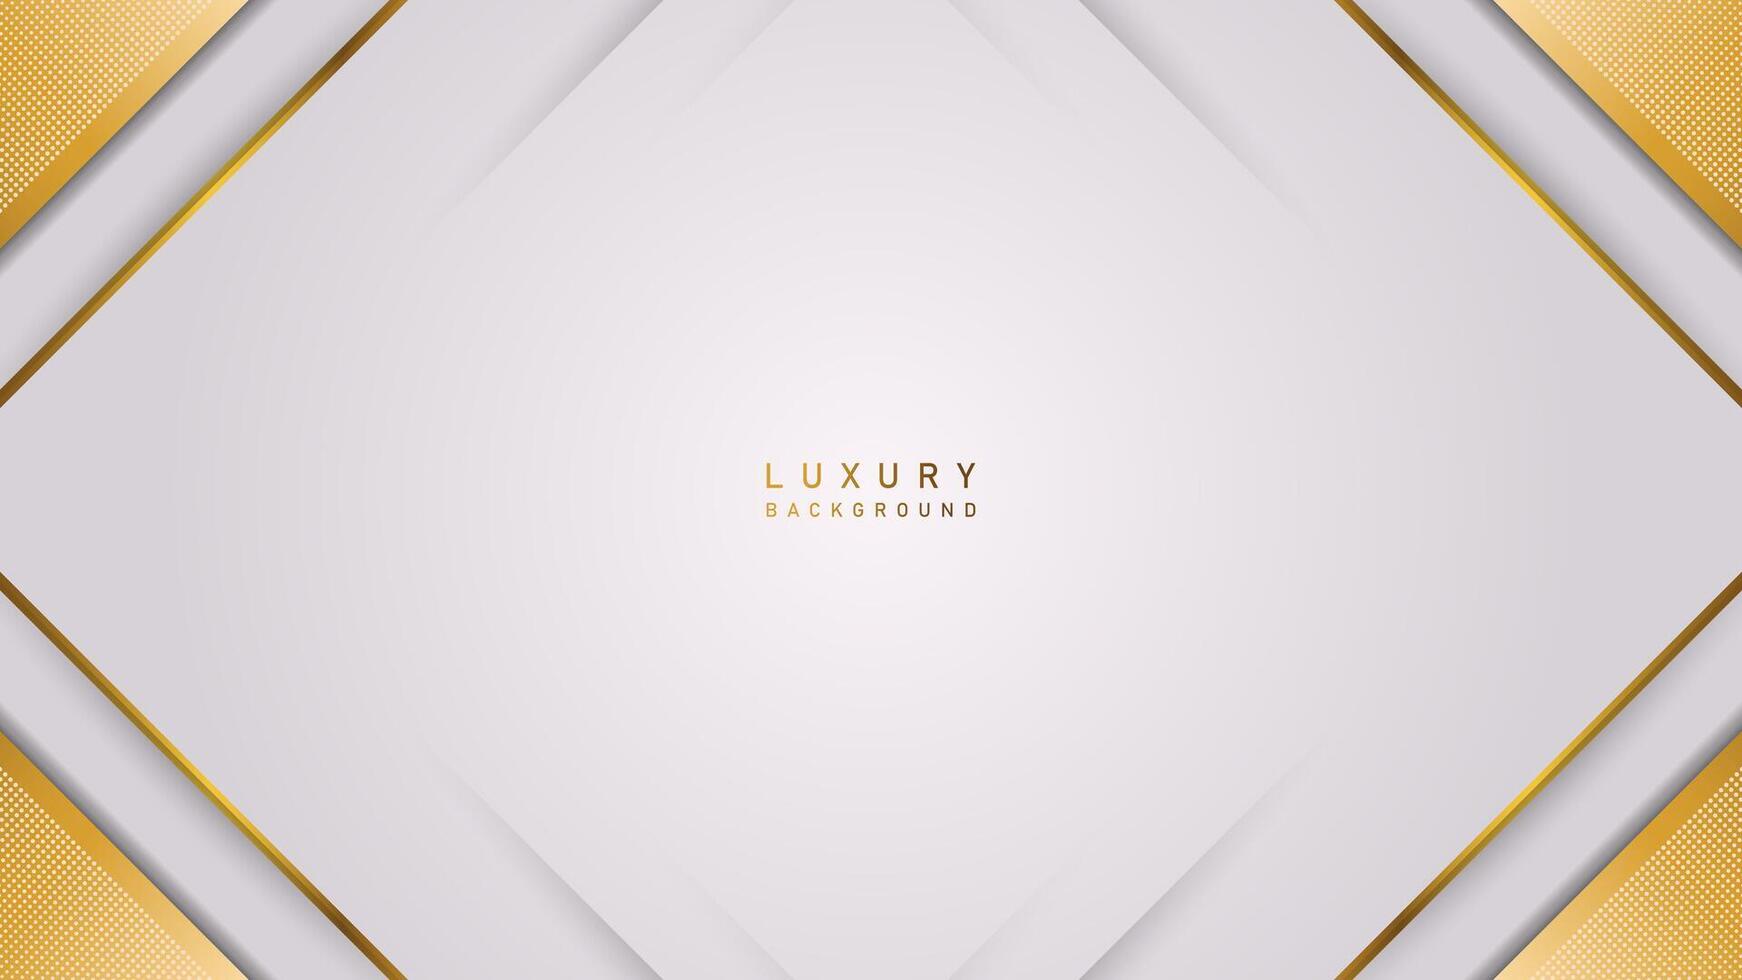 Luxury abstract modern background with golden ornament on white backdrop. Luxury premium vector illustration template deluxe design